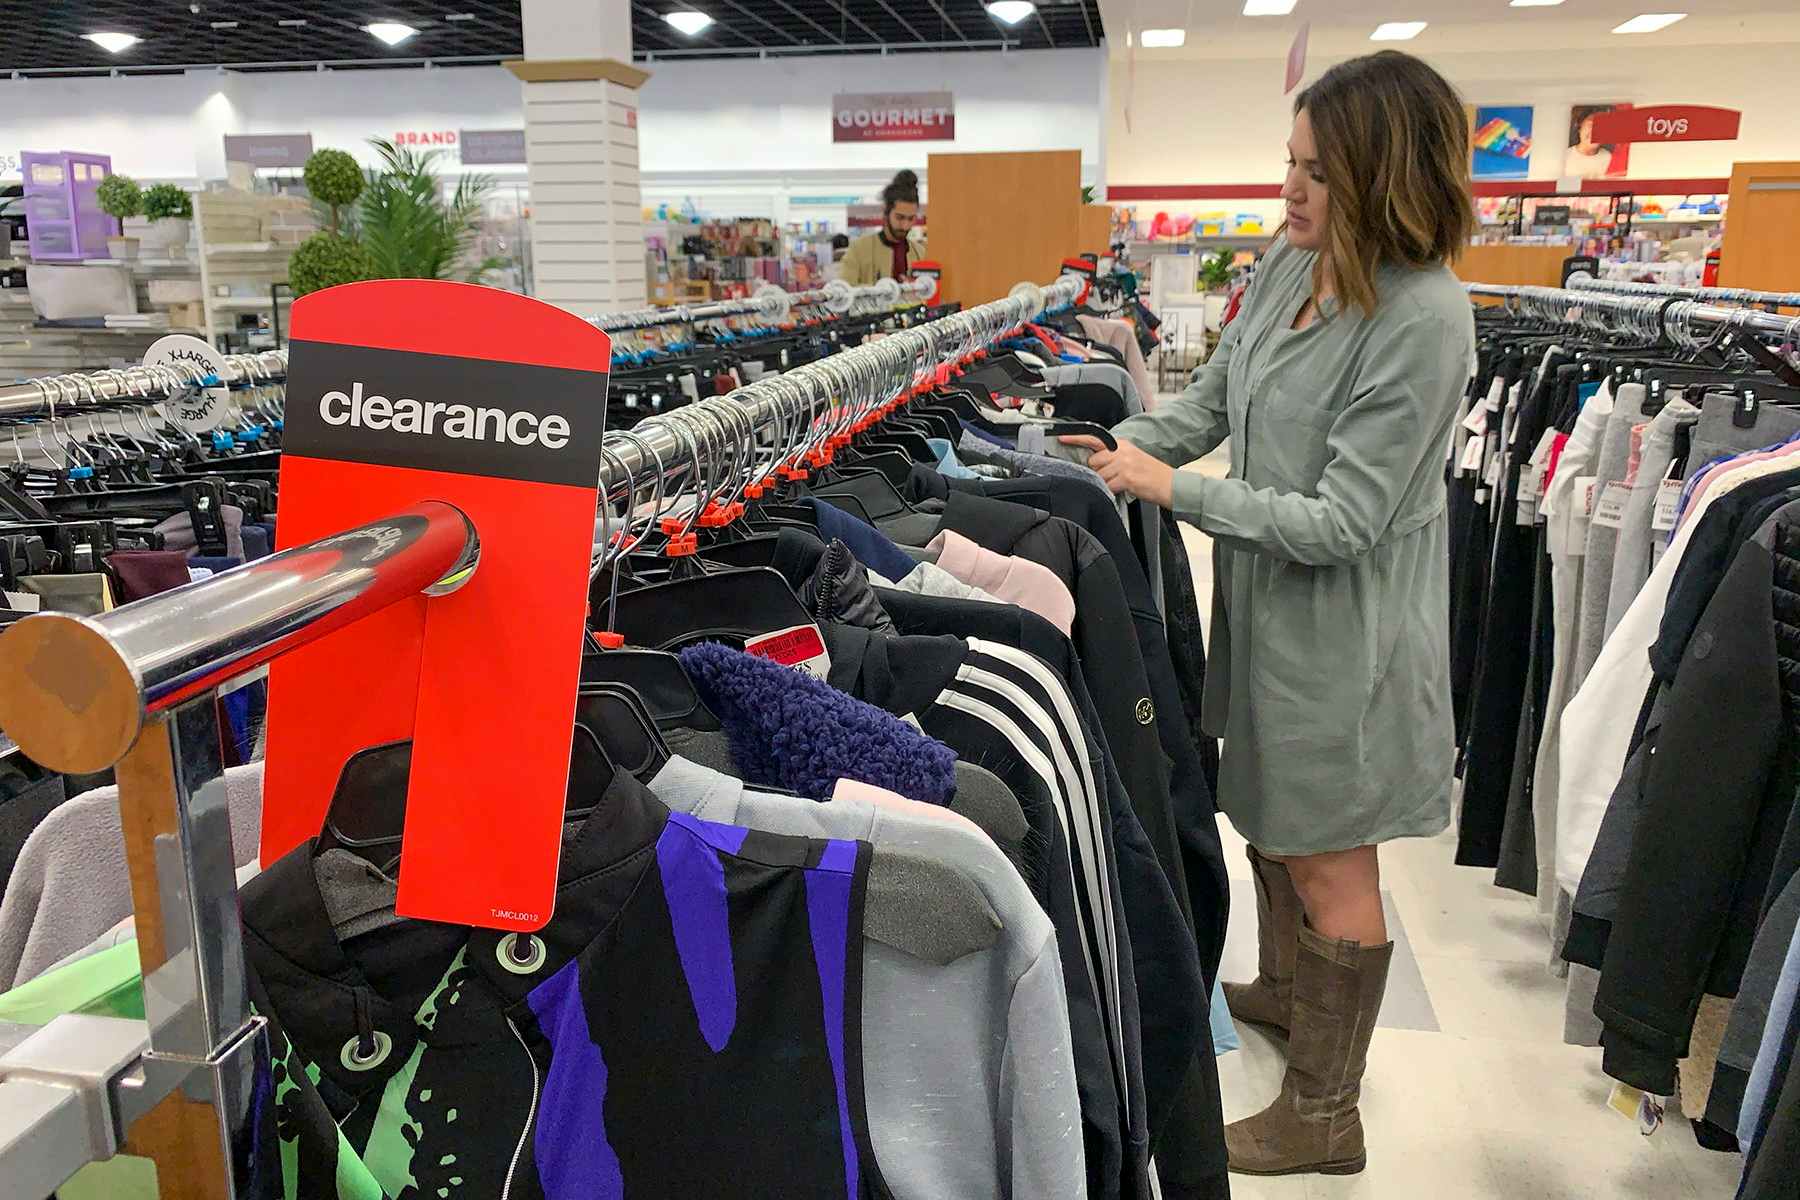 WOW! Save up to 75% off TJ Maxx's Winter Clearance Event 